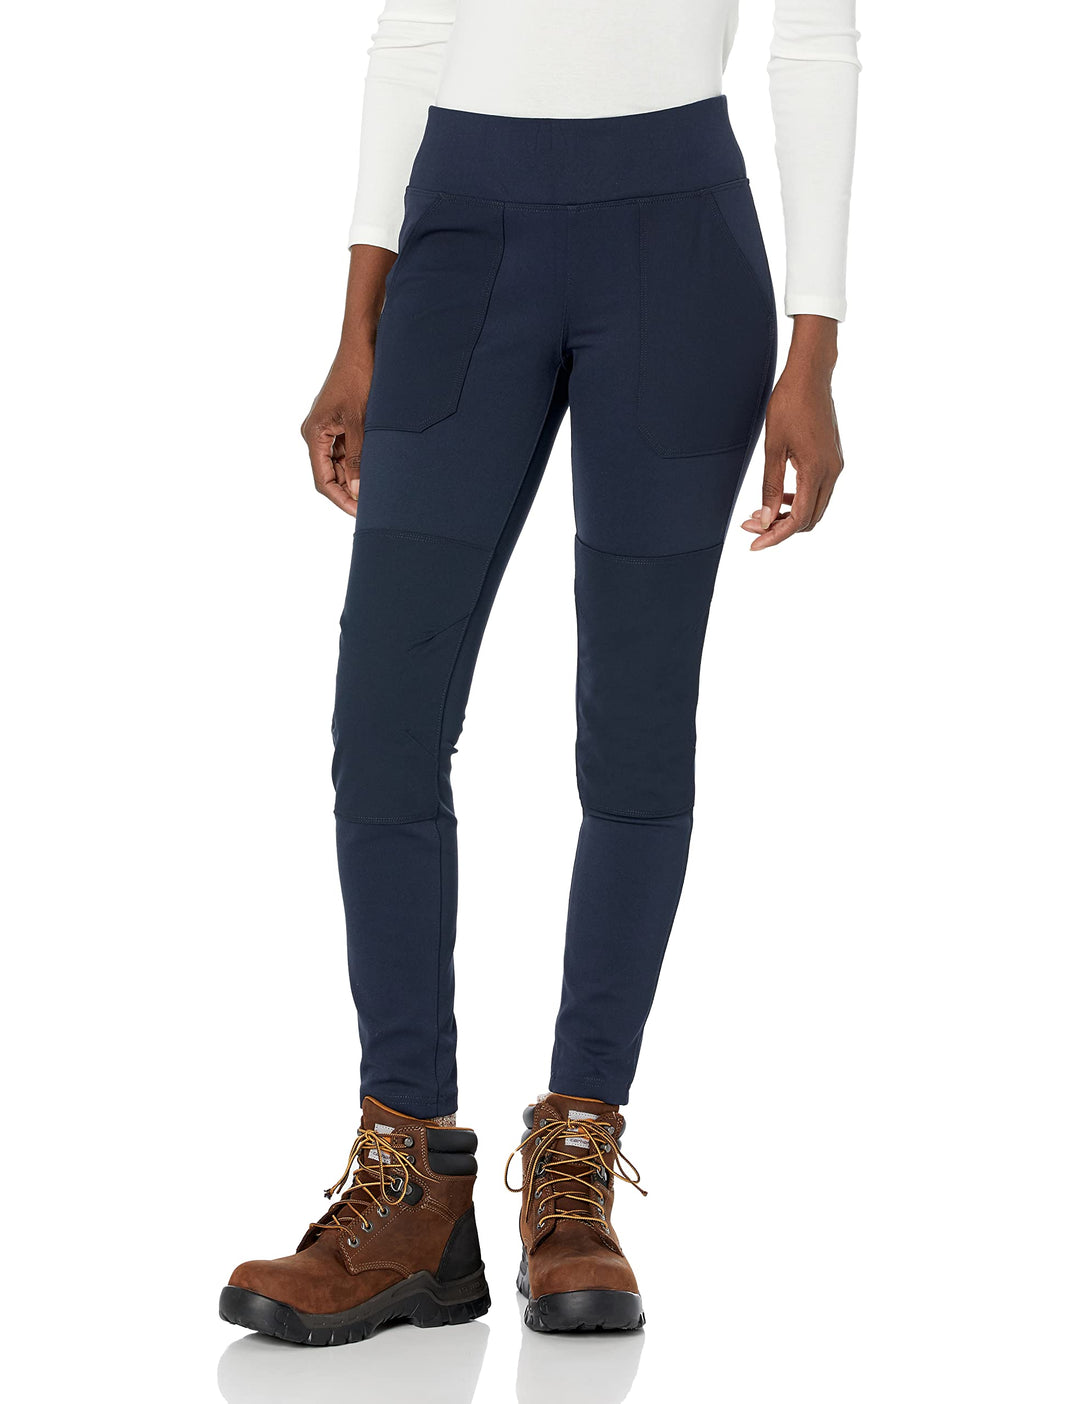 Carhartt womens Force Fitted Midweight Utility Leggings, Navy, X-Small Tall US